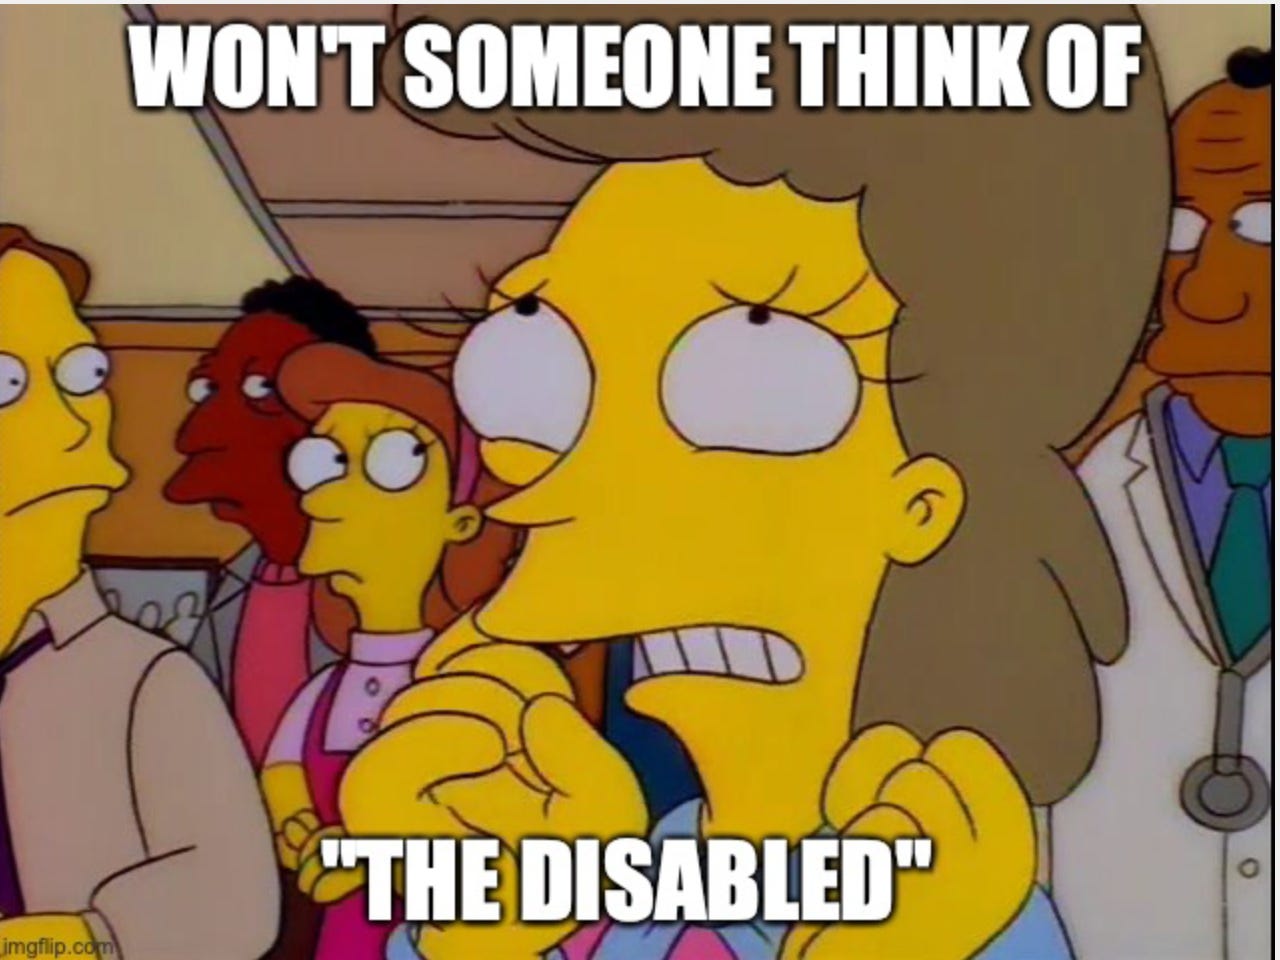 Helen Lovejoy meme from The Simpsons. Captioned: Won't Someone Think Of The Disabled